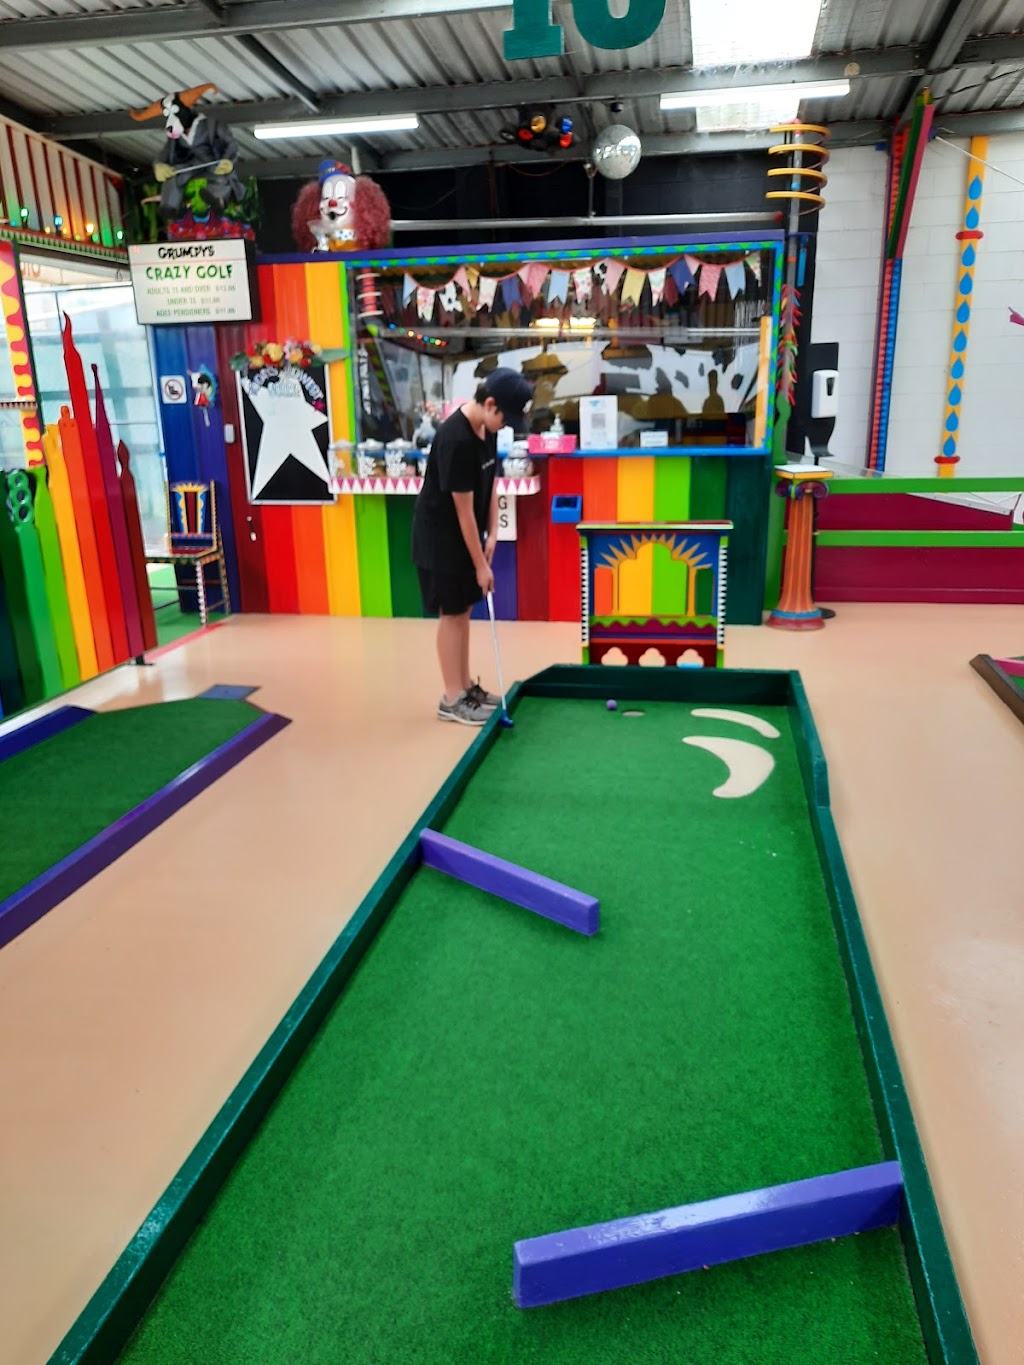 Grumpys Crazy Golf | tourist attraction | 152 Thompson Ave, Cowes VIC 3922, Australia | 0359523060 OR +61 3 5952 3060